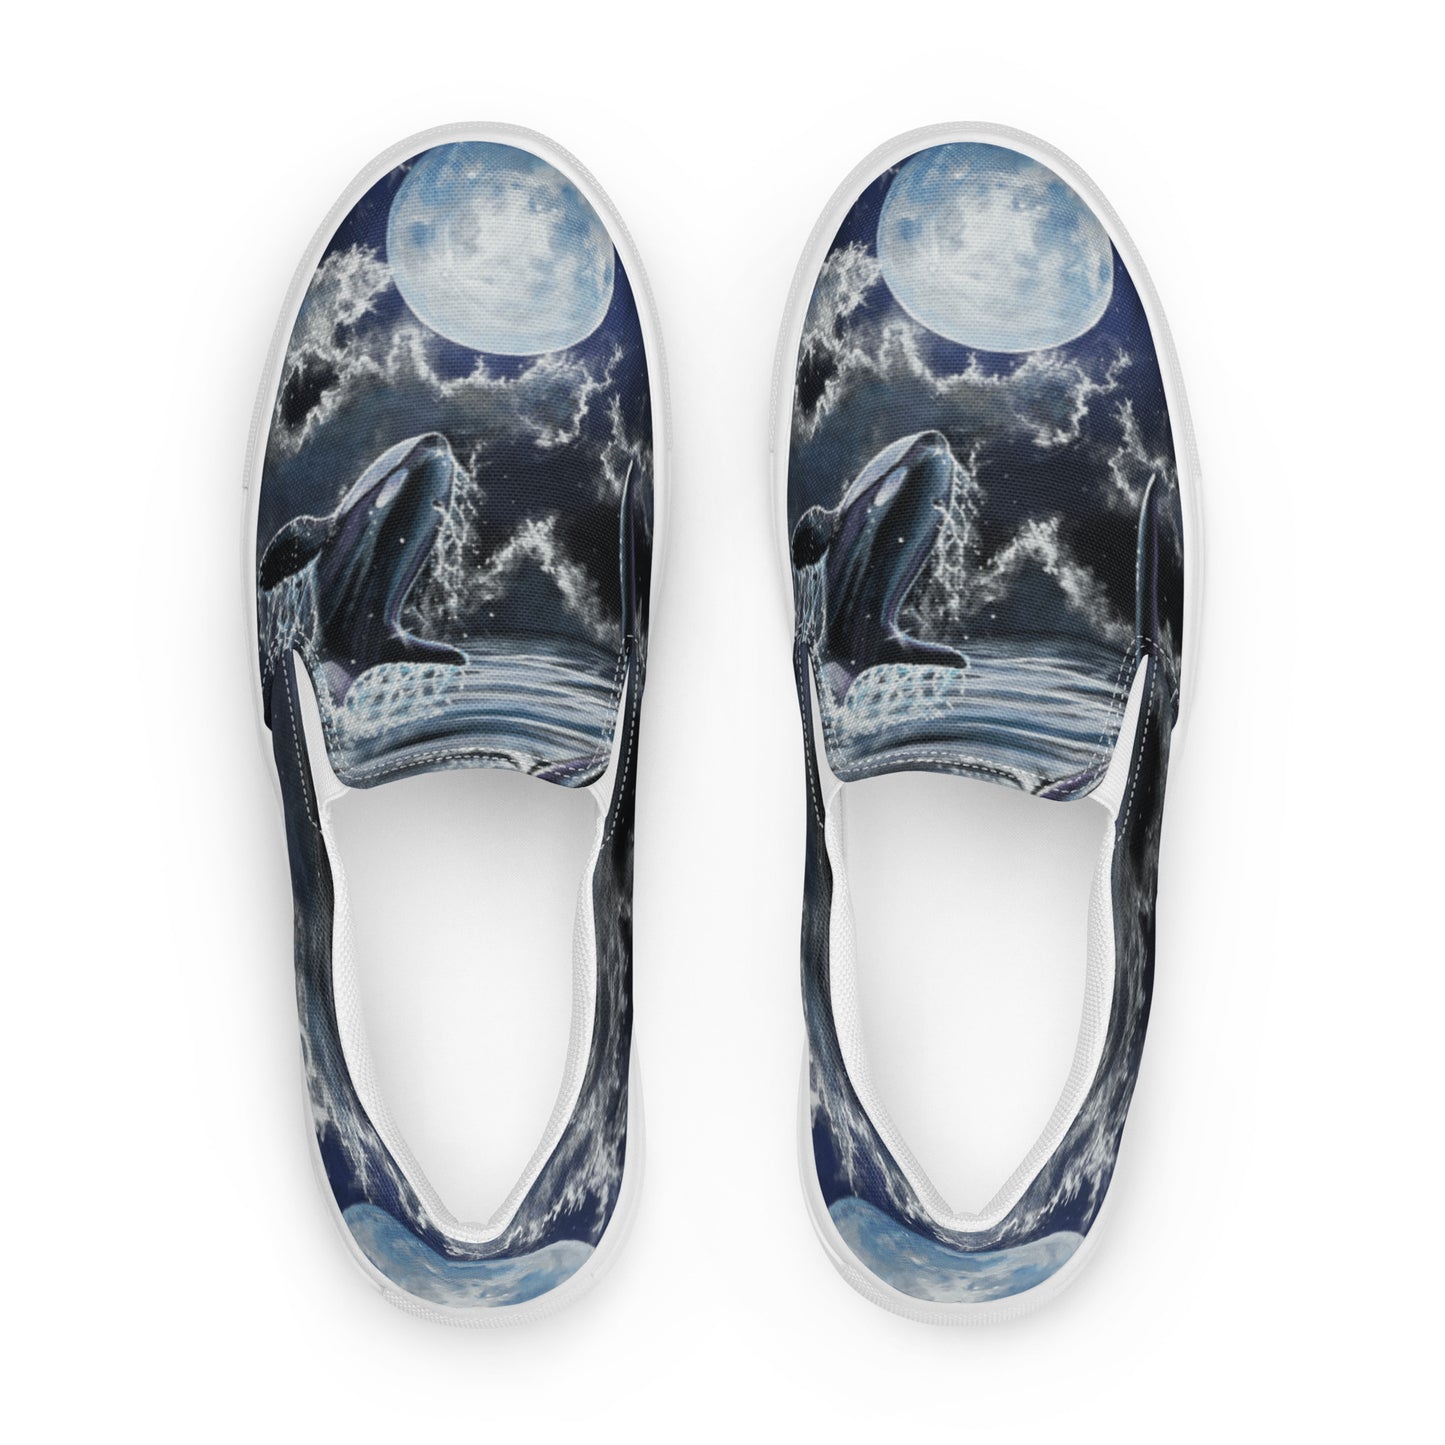 "Moonlit playtime" Women’s slip-on canvas shoes